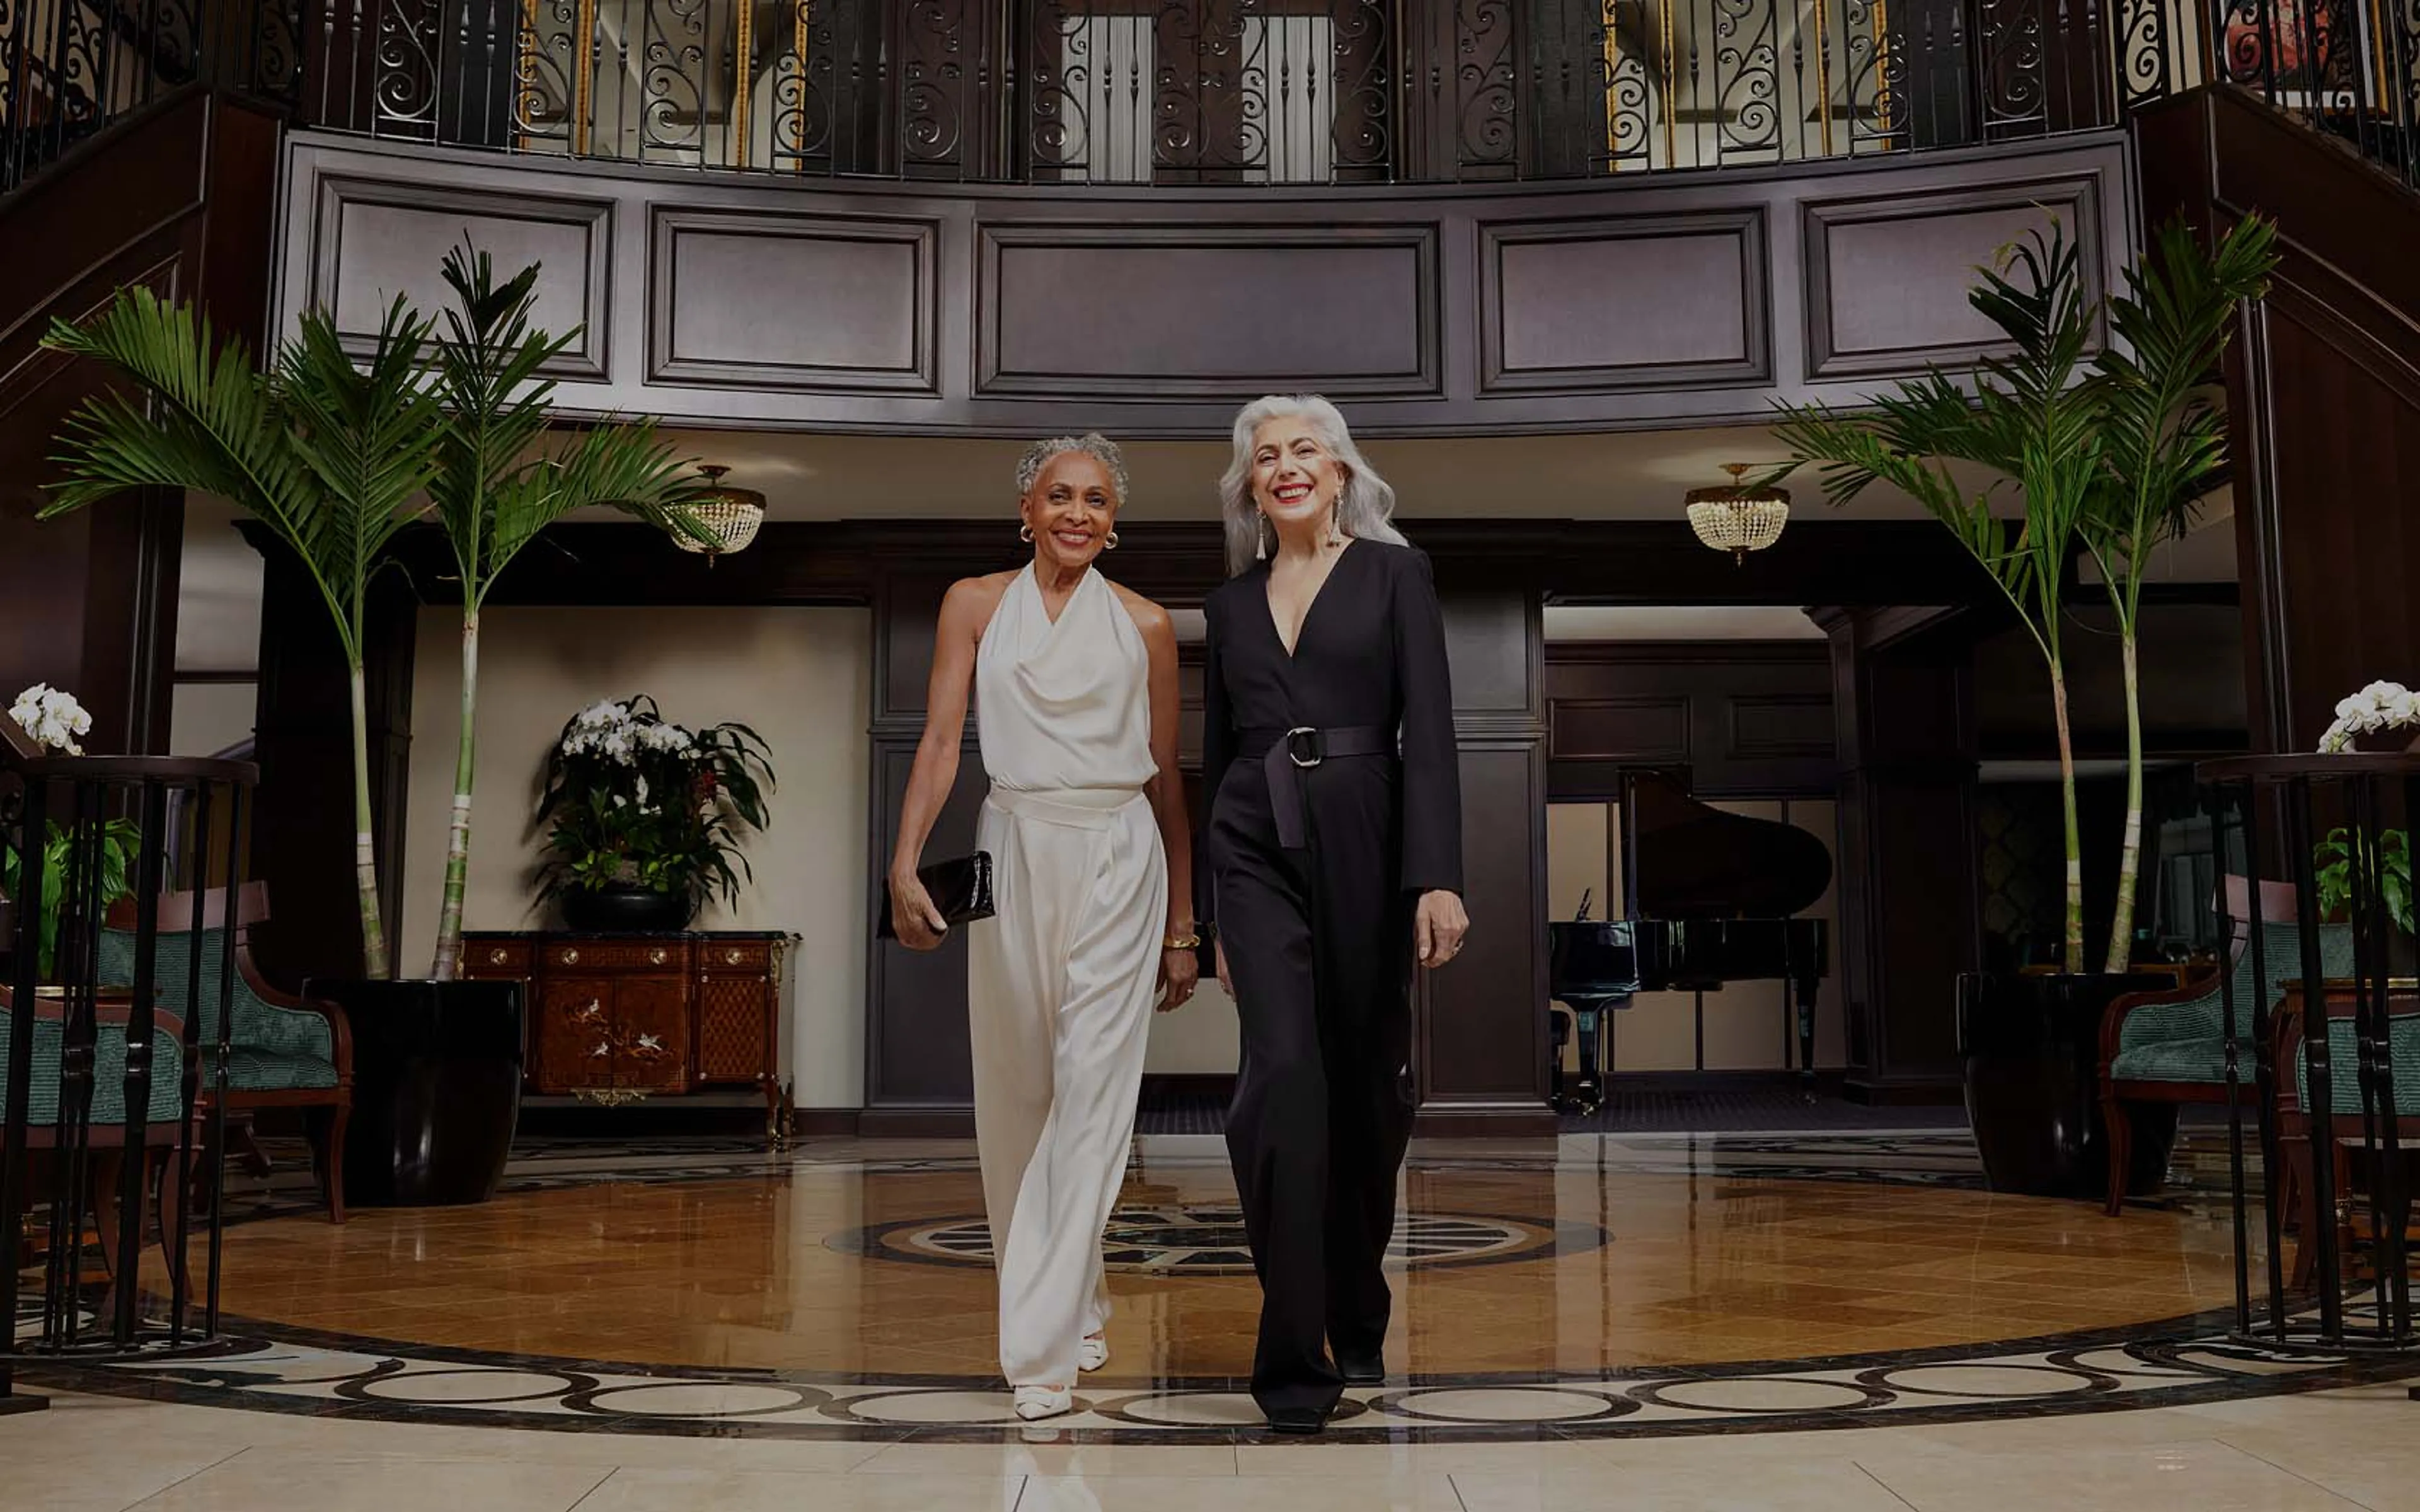 Two smiling women stand at the base of an elegant staircase in a luxurious lobby with a grand chandelier overhead.